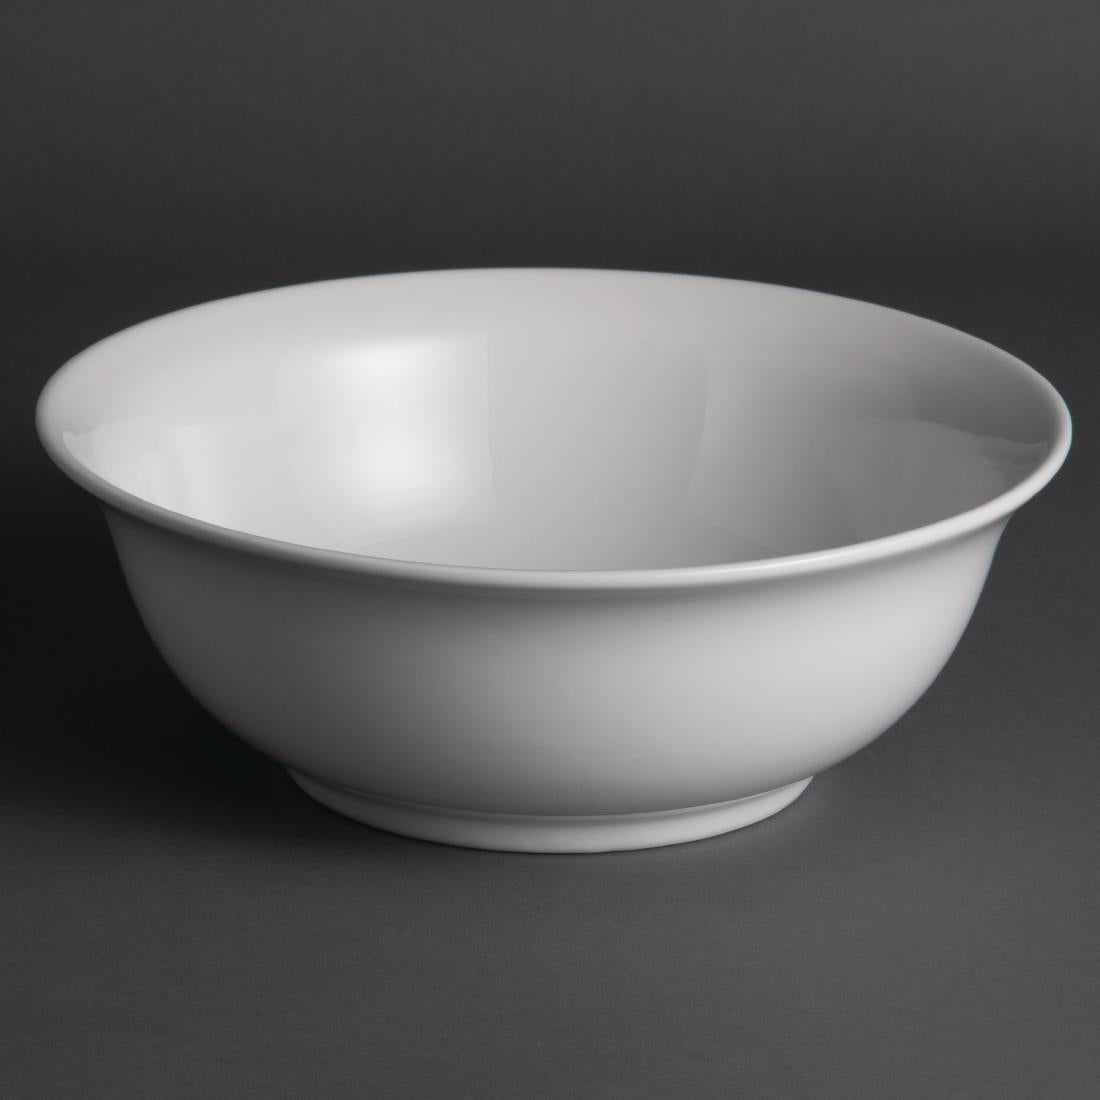 W436 Olympia Whiteware Salad Bowls 235mm (Pack of 6)